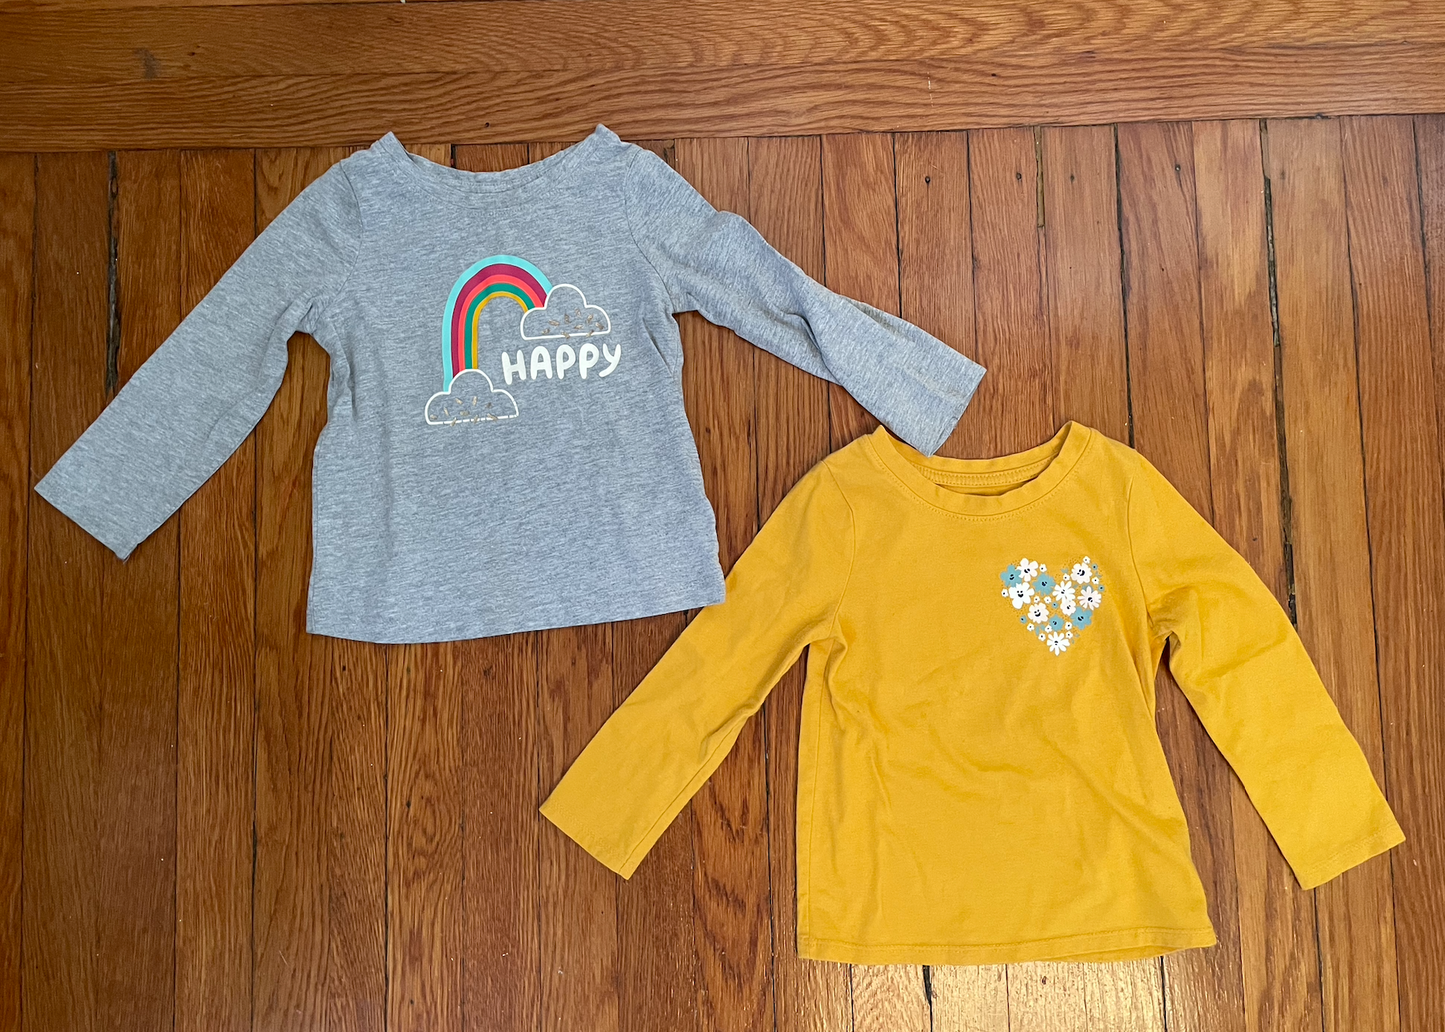 Cat and Jack long sleeve shirt bundle - girls size 2T - yellow and gray shirts